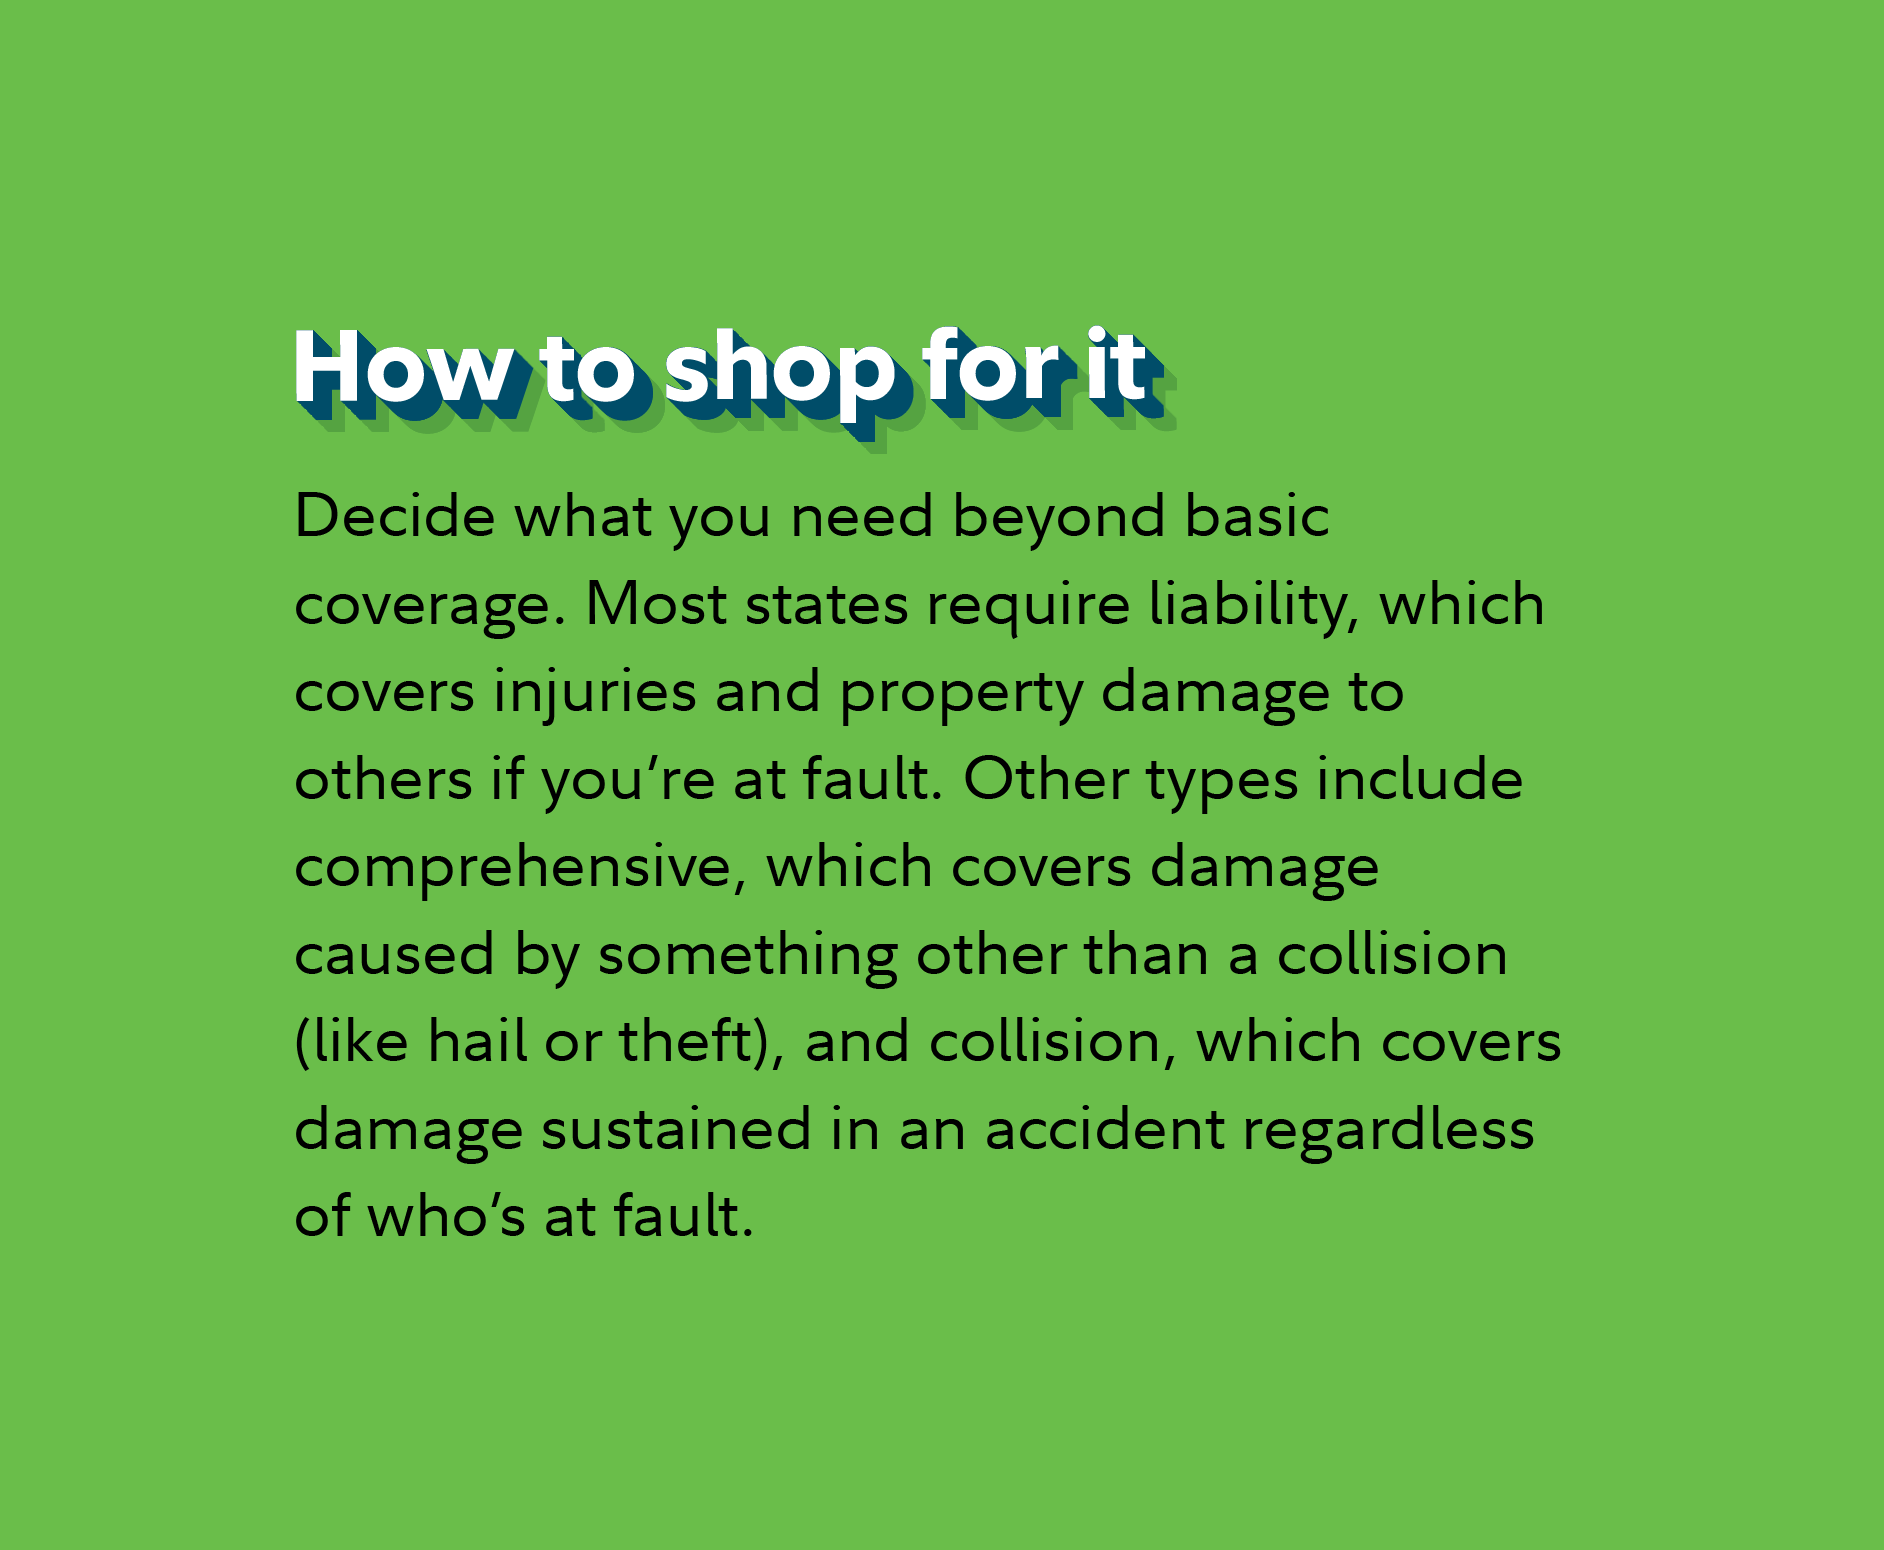 How to shop for it Decide what you need beyond basic coverage. Most states require liability, which covers injuries and property damage to others if you’re at fault. Other types include comprehensive, which covers damage caused by something other than a collision (like hail or theft), and collision, which covers damage sustained in an accident regardless of who’s at fault.